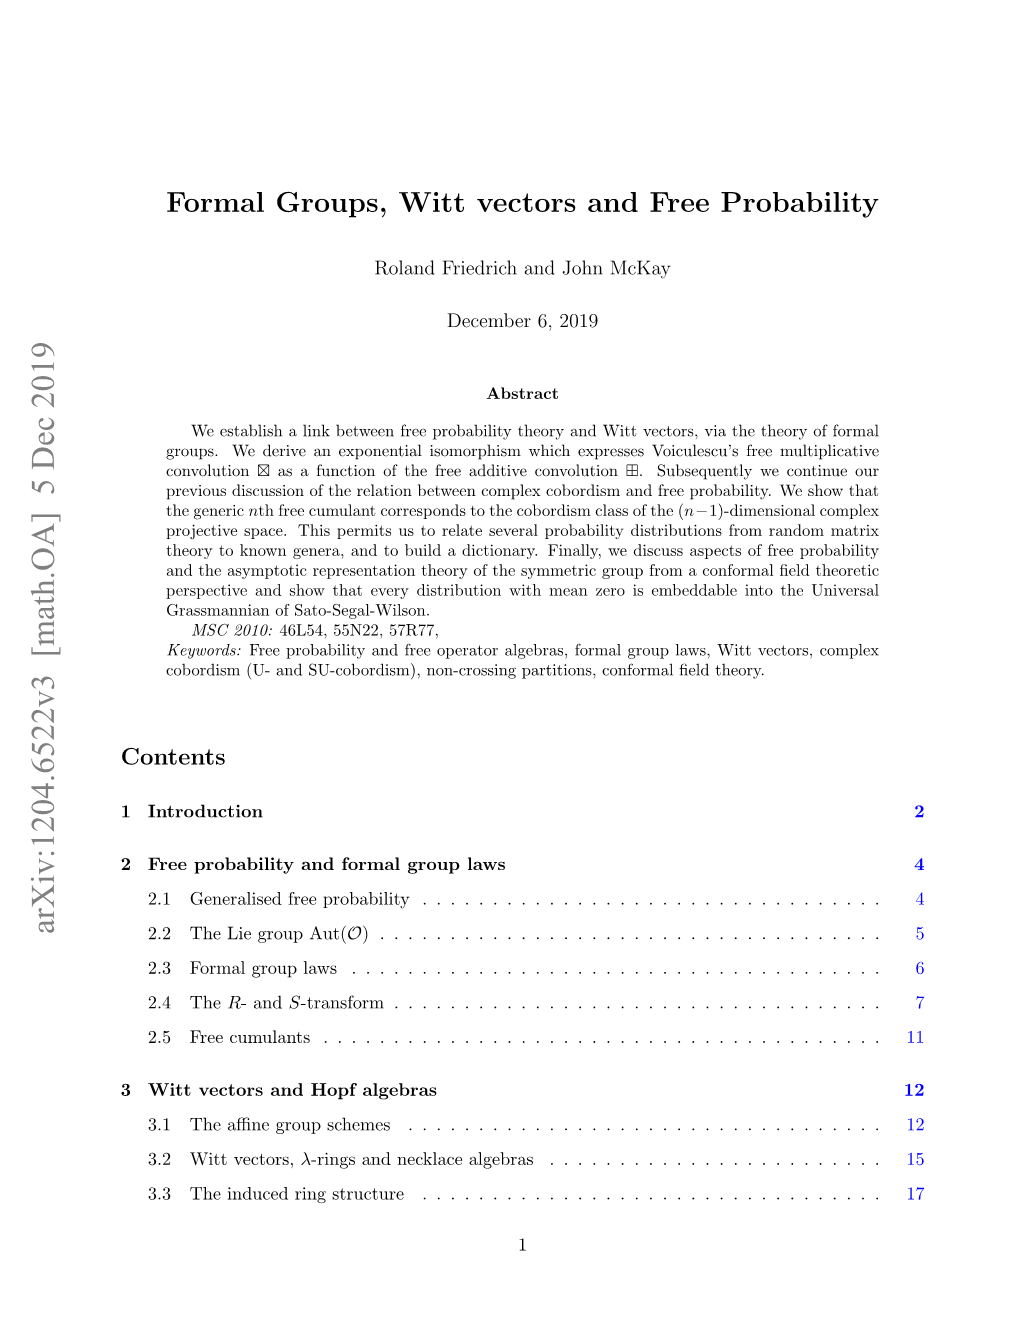 Formal Groups, Witt Vectors and Free Probability